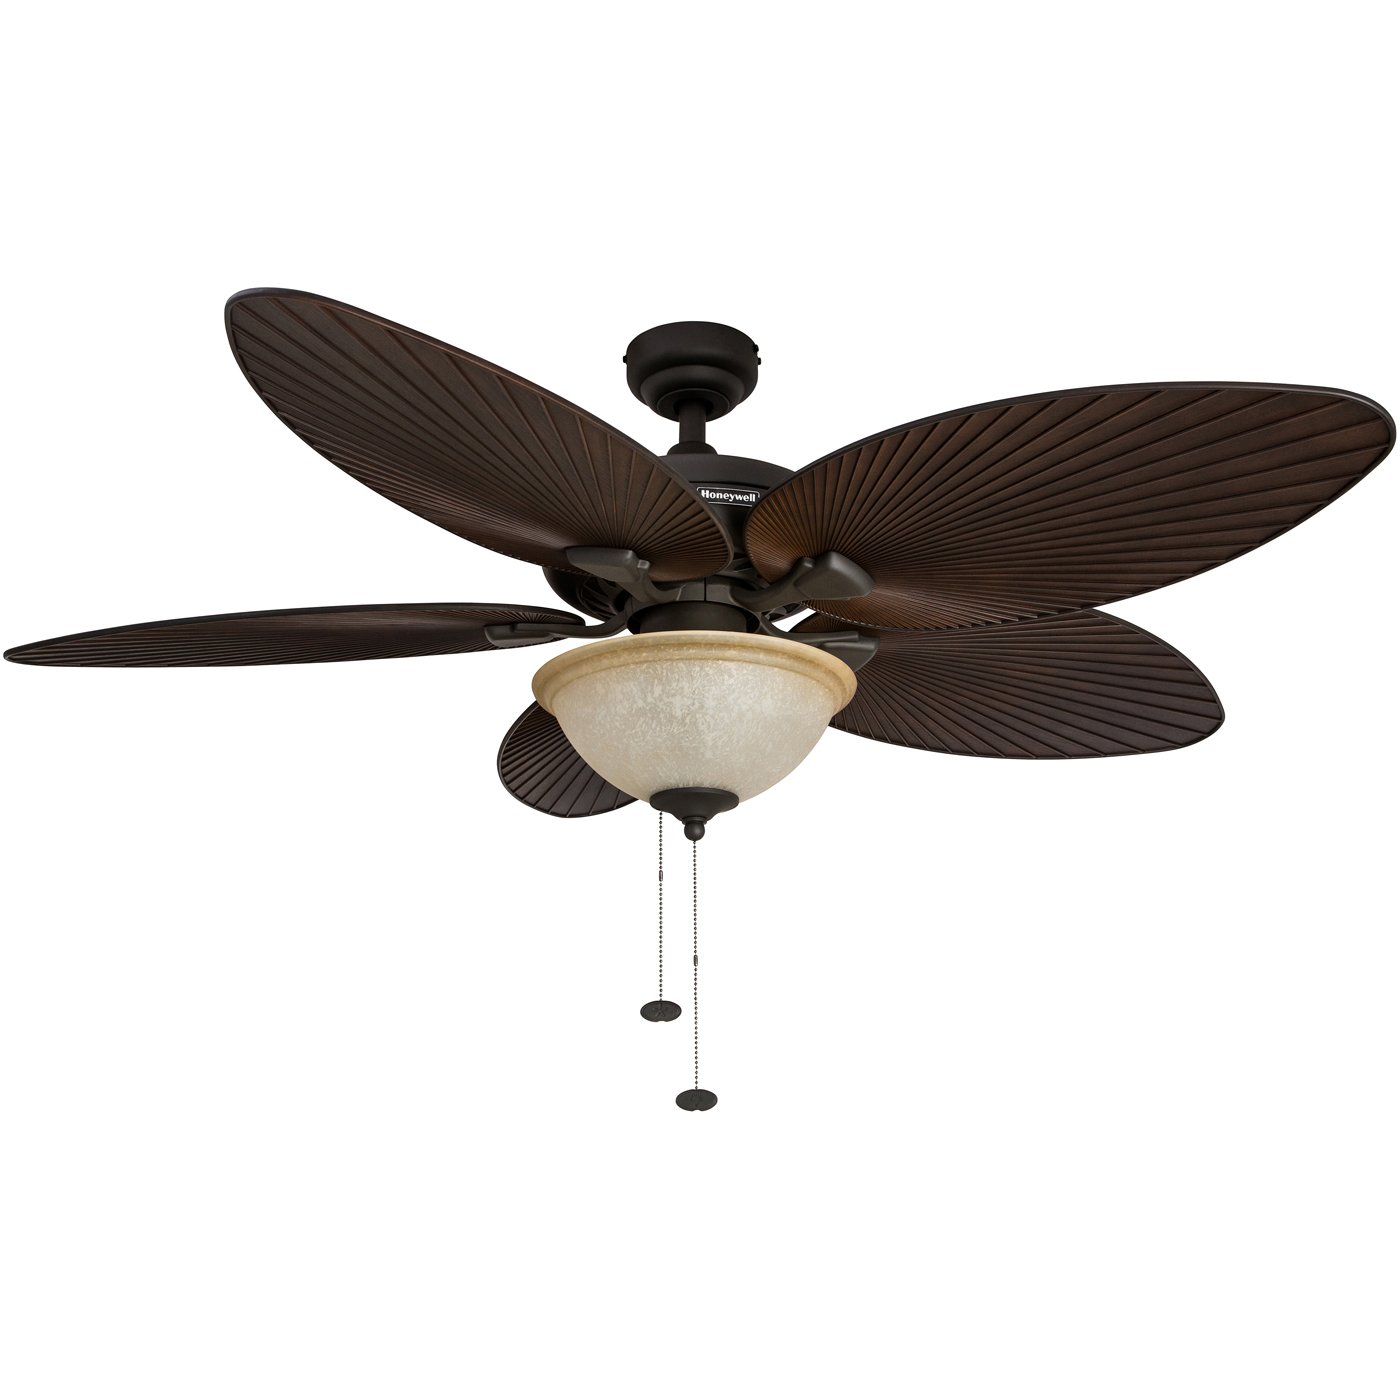 Honeywell Ceiling Fans Palm Island, 52 Inch Tropical Indoor Outdoor Ceiling Fan with Light, Pull Chain, Dual Mounting Options, 5 Palm Leaf Blades, Reversible Motor - 50202-01 (Bronze)